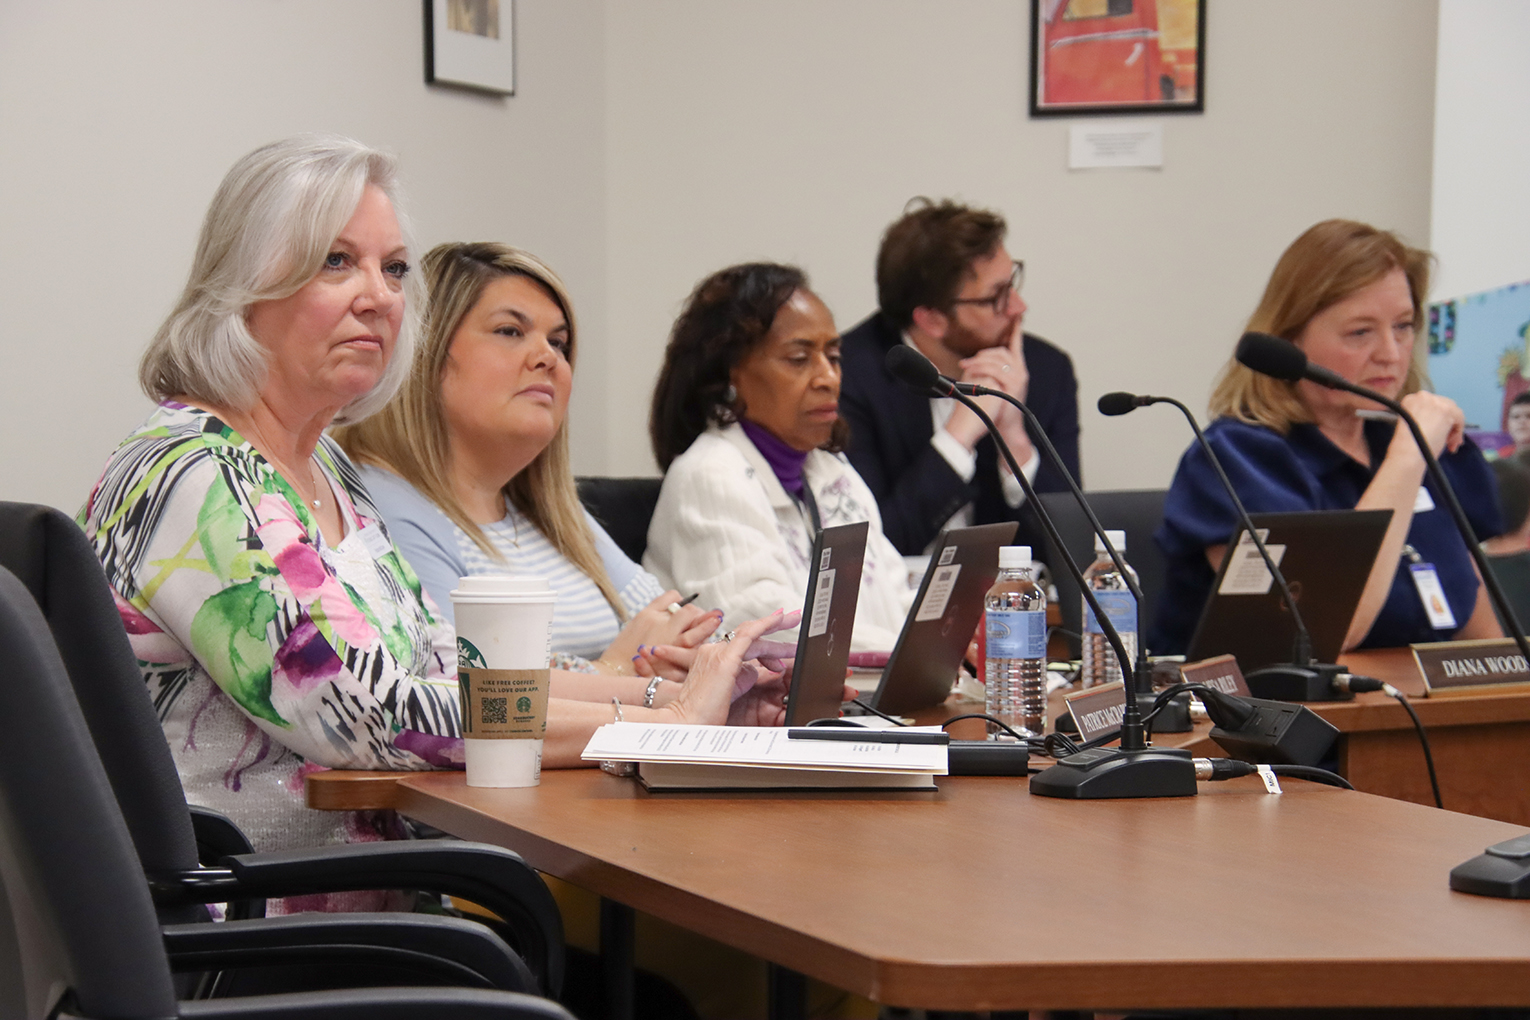 Patrice McCrary, Alissa Riley, Diana Woods and Holly Bloodworth listen during a presentation